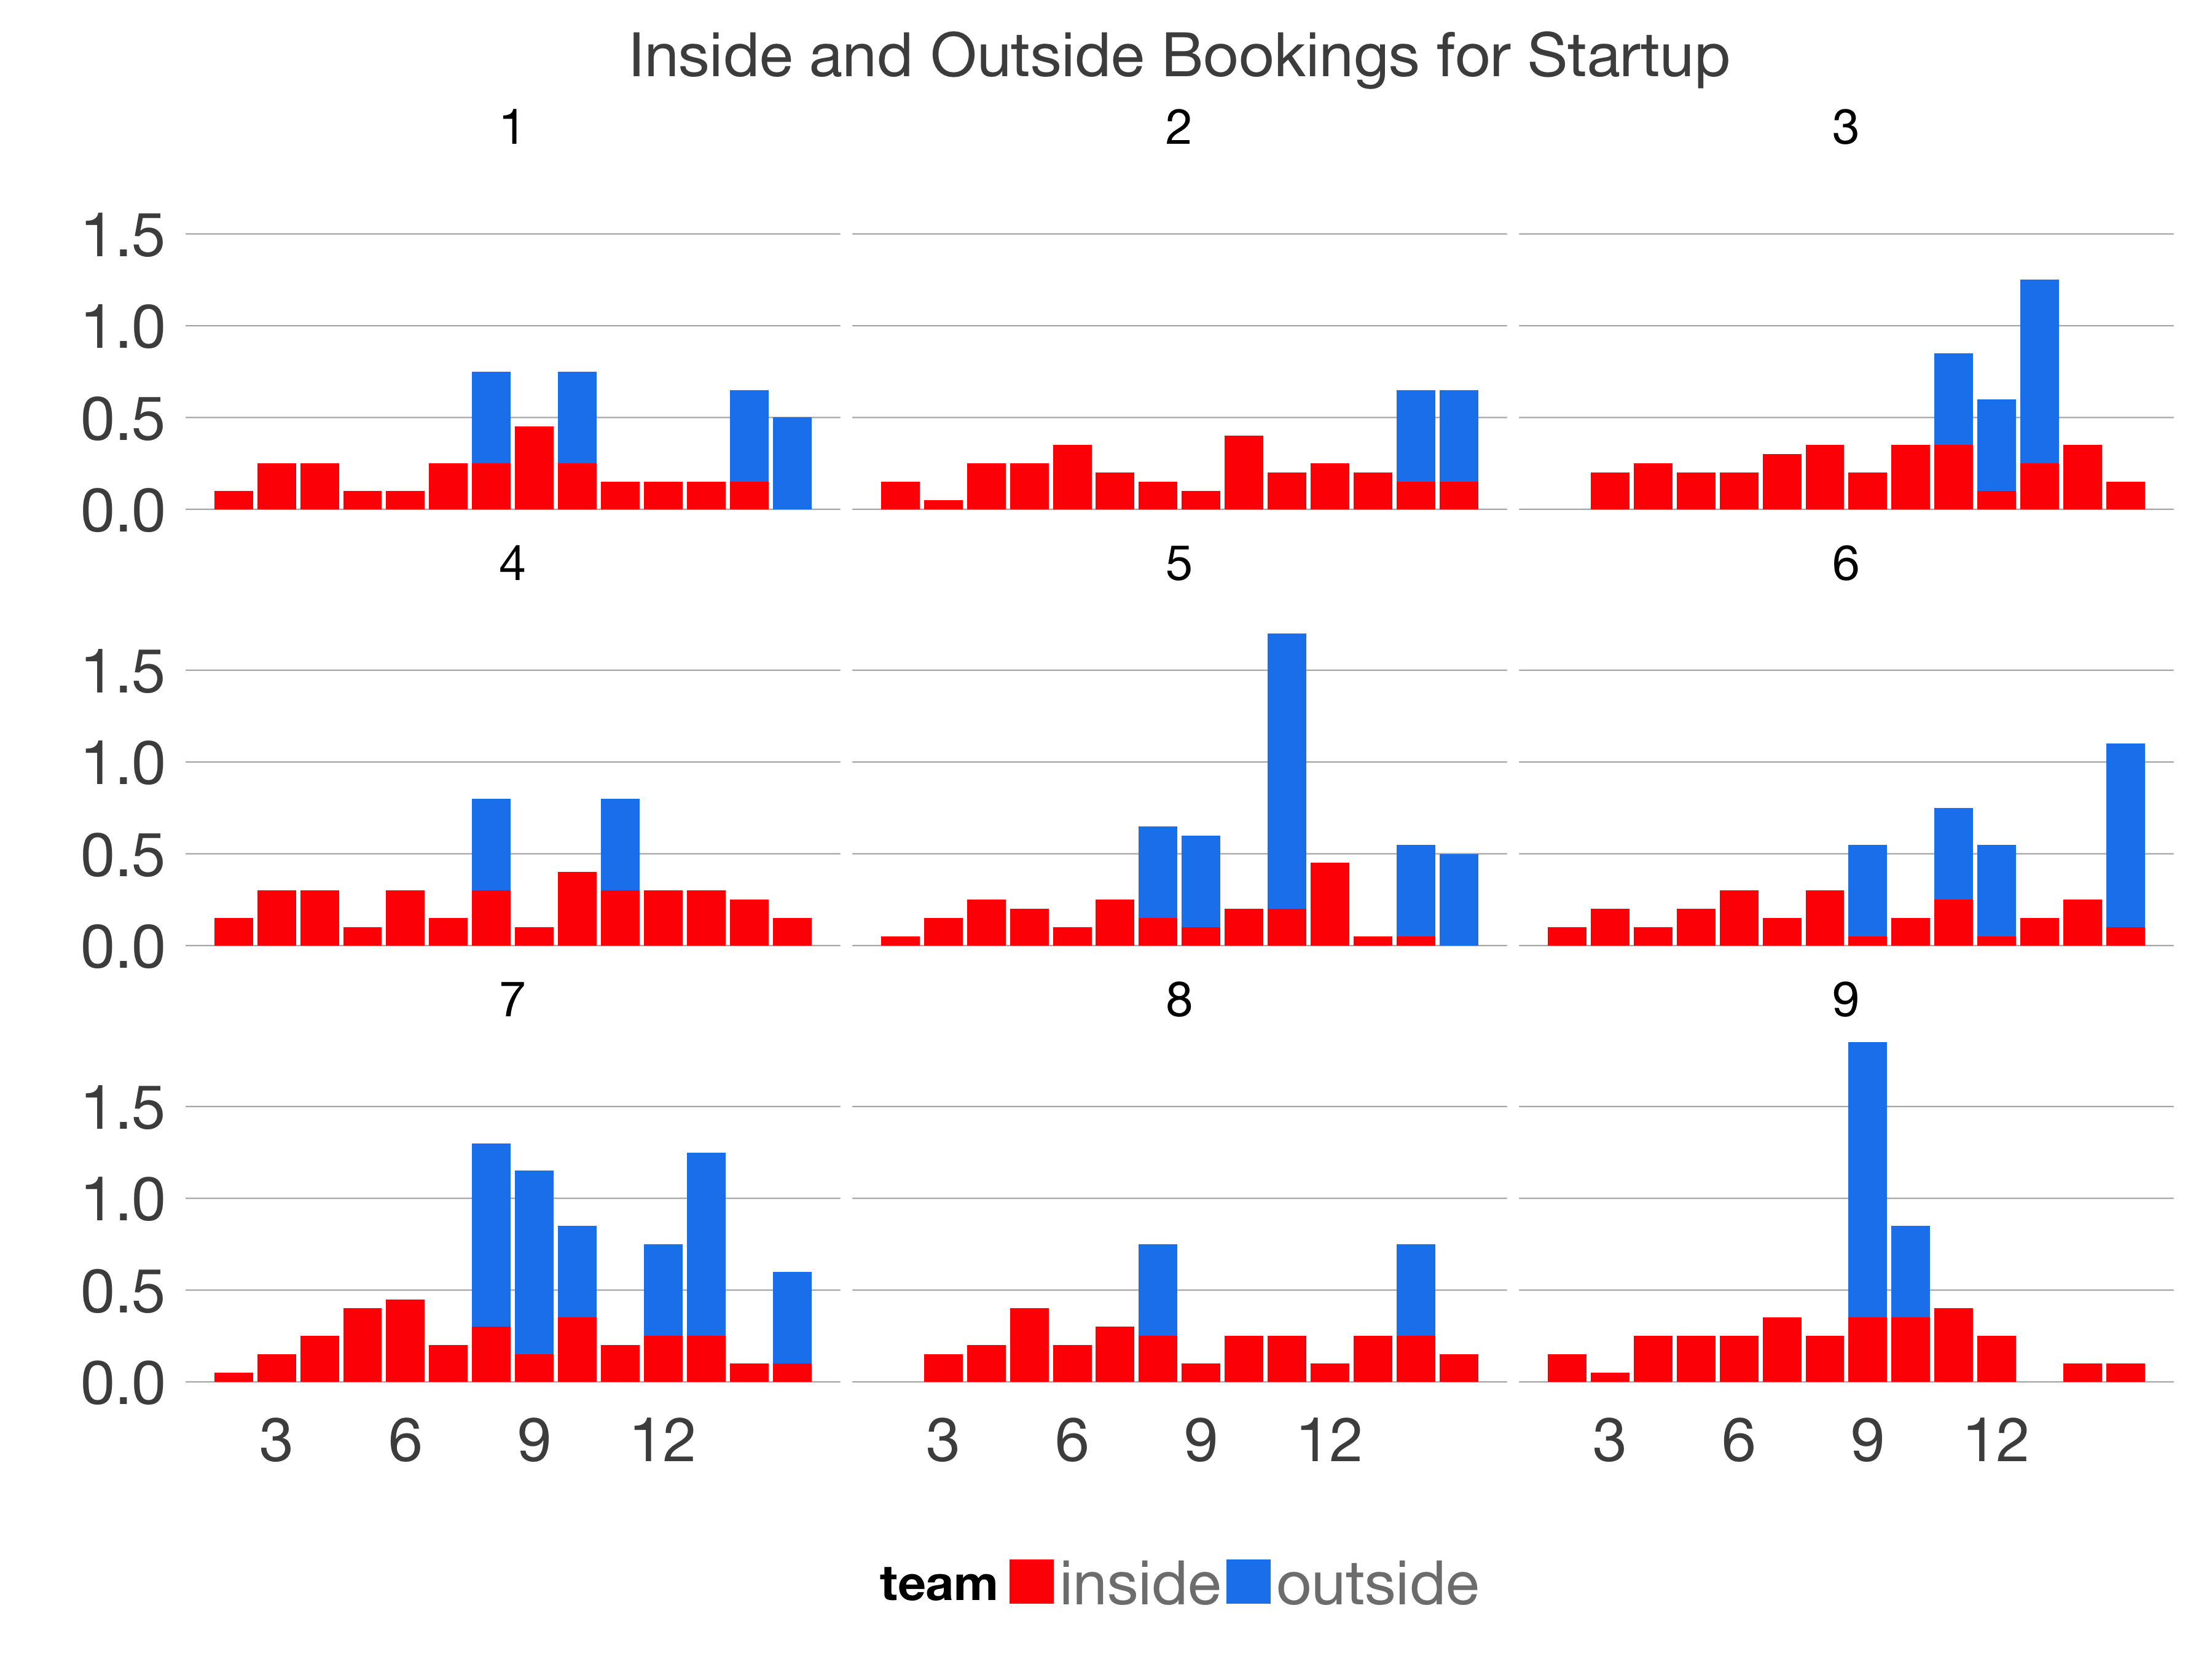 Monte Carlo Simulations Of Inside And Outside Sales Teams In A SaaS Startup